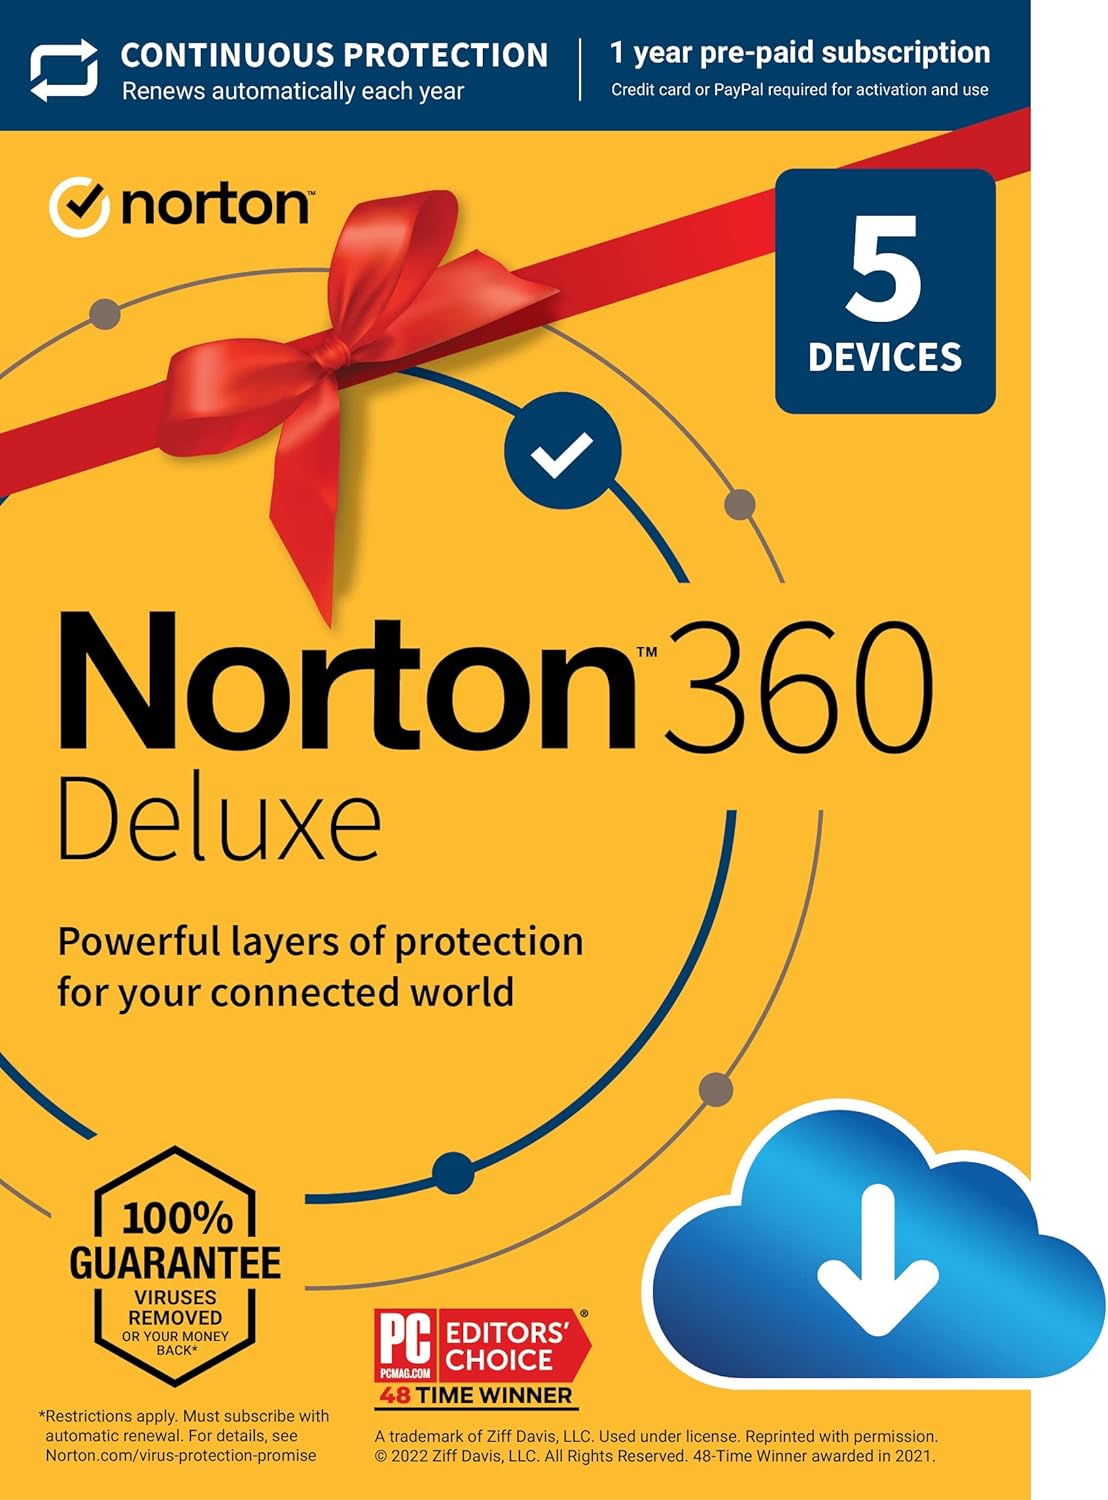 Limited-Time Offer: Norton 360 Deluxe - Antivirus Software for 5 Devices with VPN and PC Cloud Backup